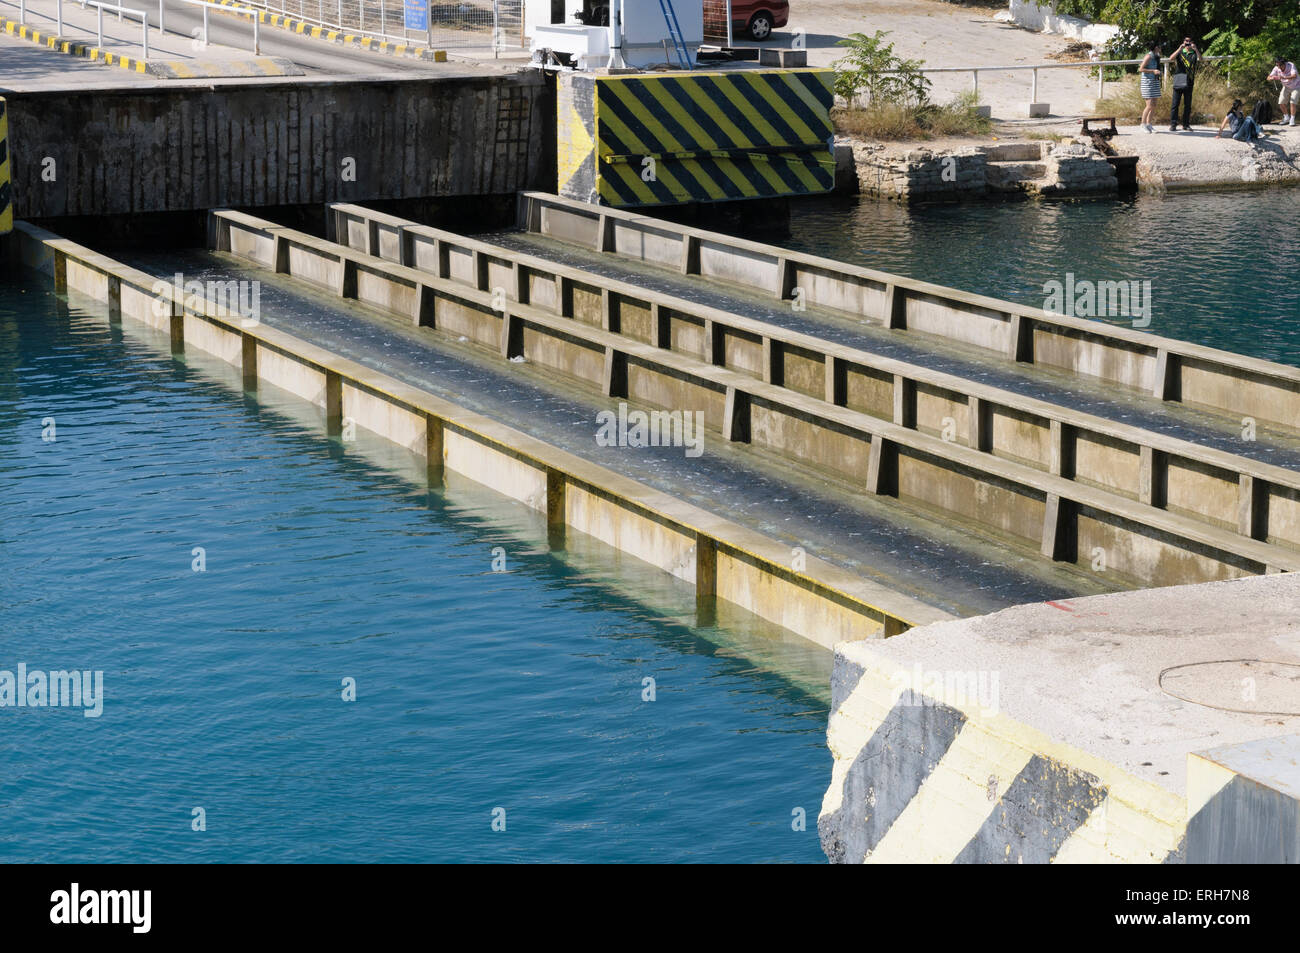 Lowering of the submersible bridge at Isthmia on the Corinth canal, Greece Stock Photo